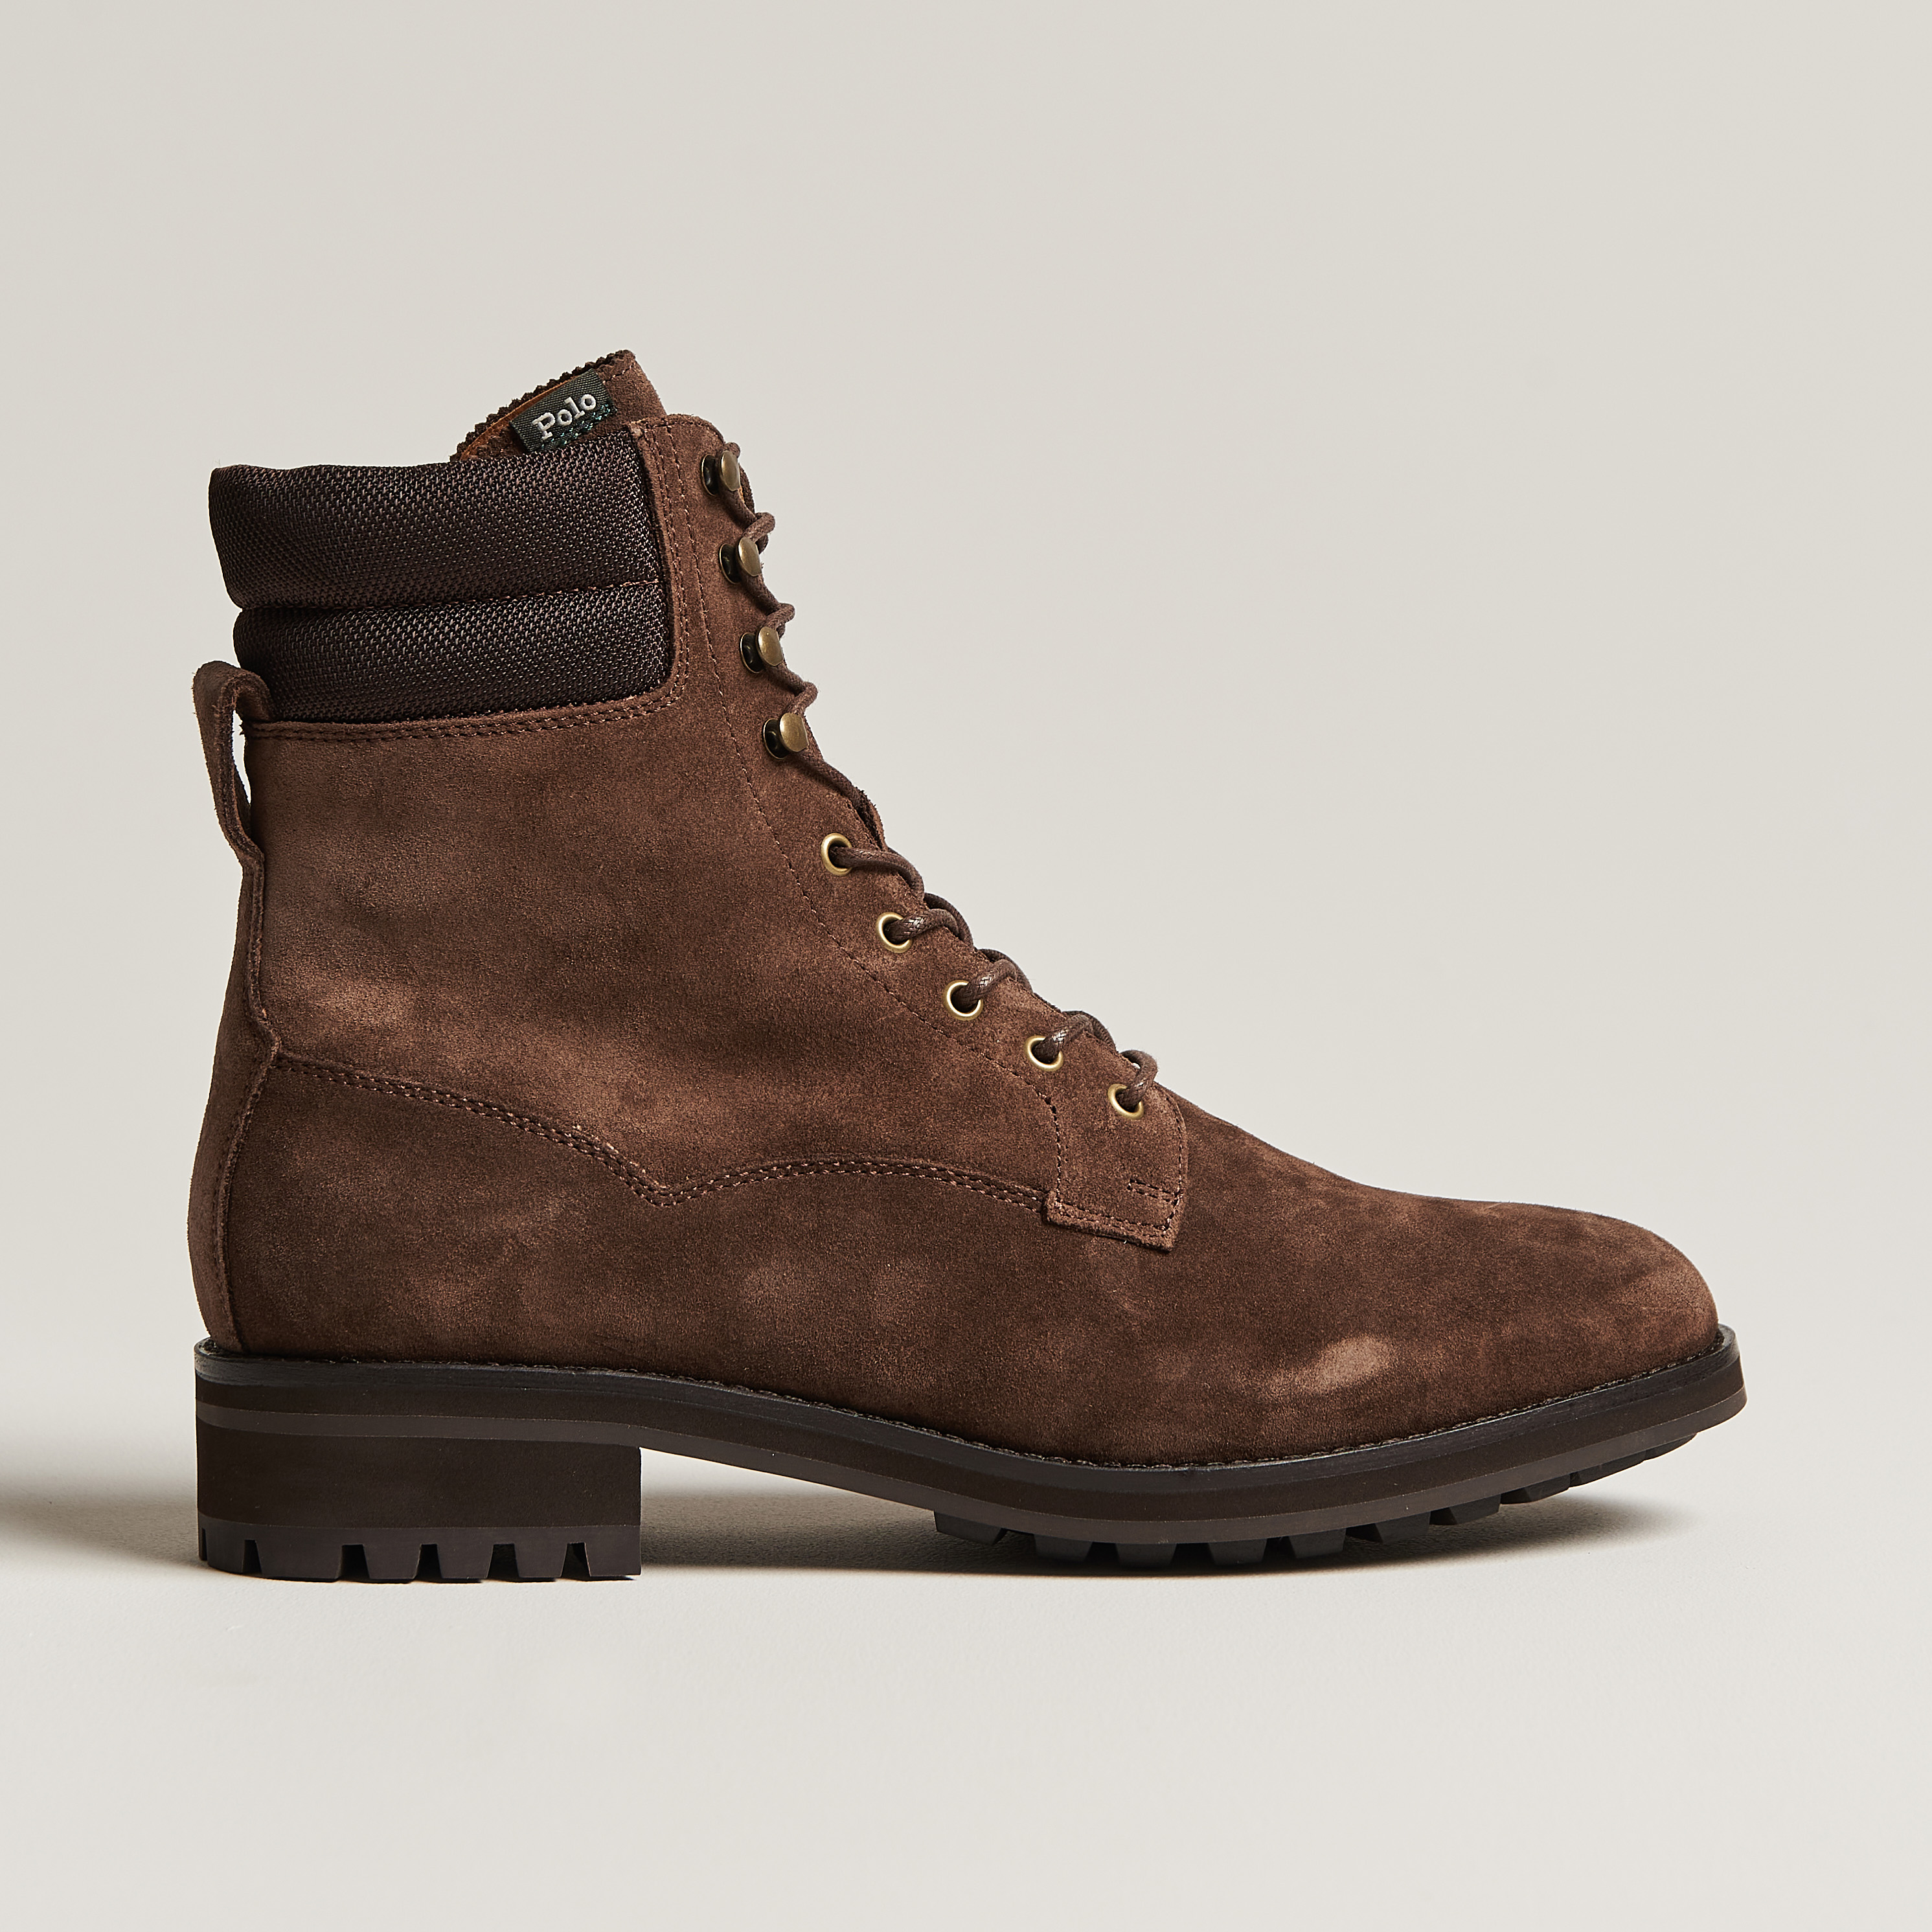 Polo Ralph Lauren Bryson Suede Boot Chocolate Brown bei Care of Carl